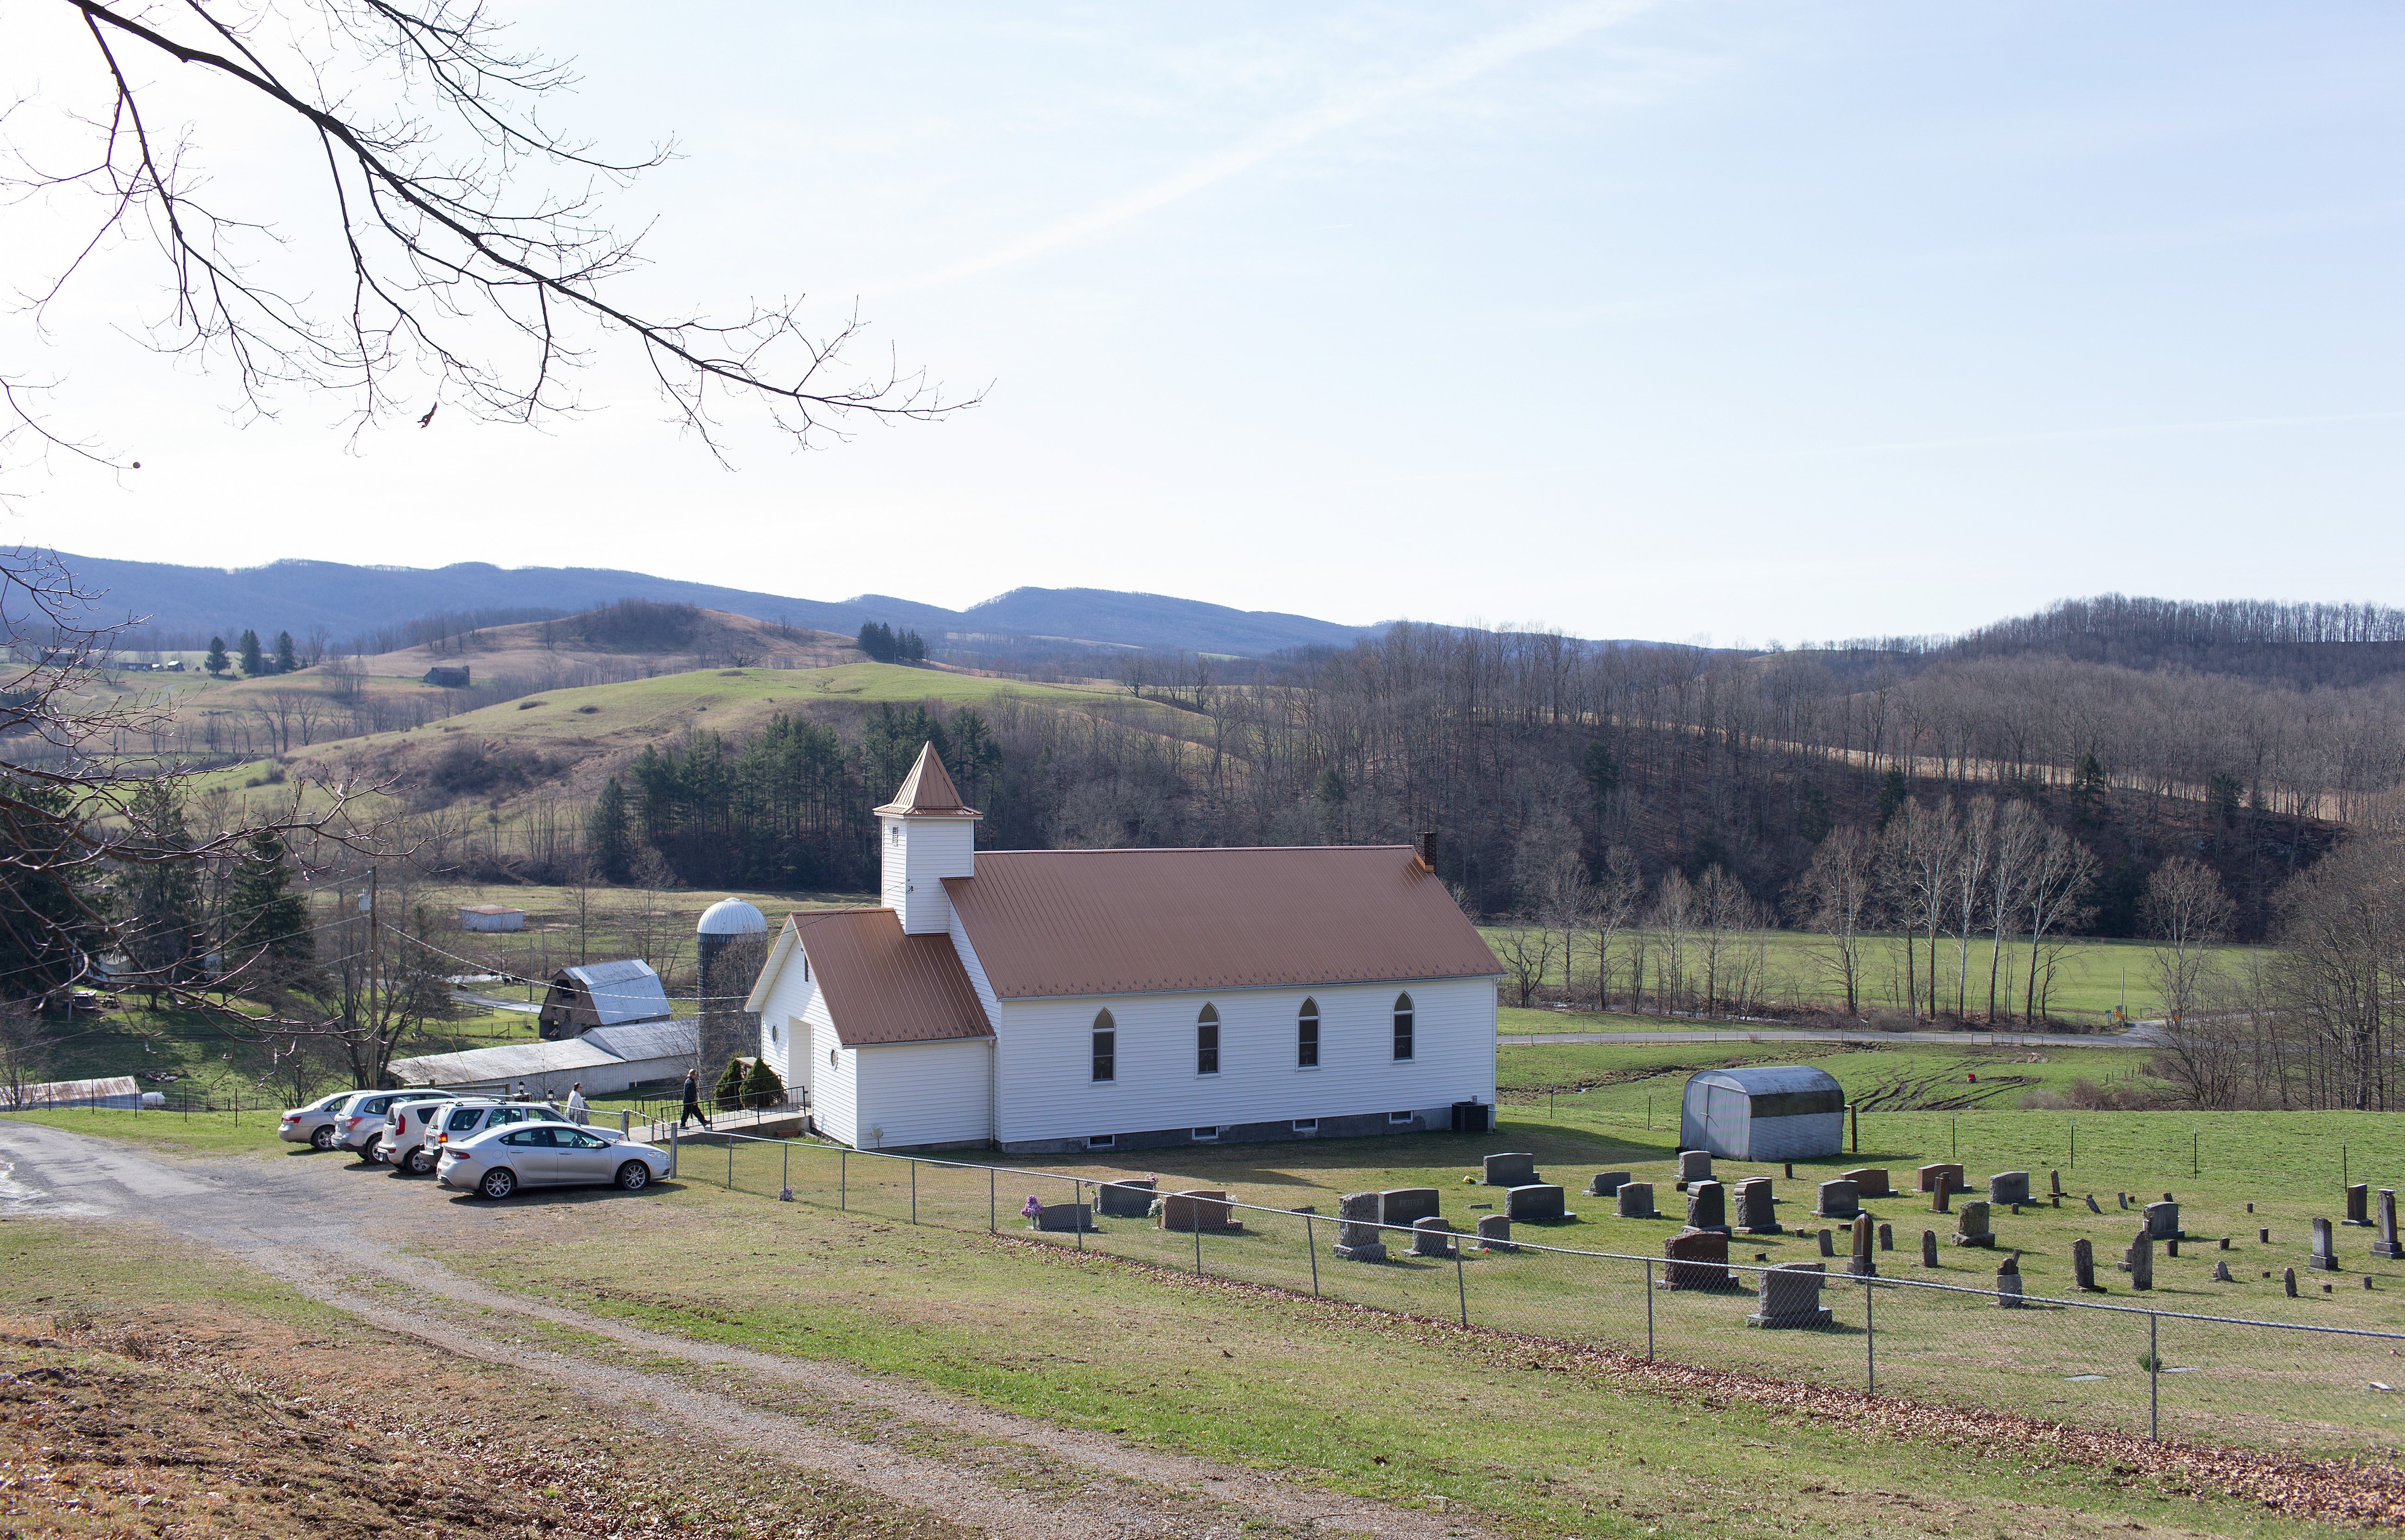 Families arrive for the Easter Sunday service at New Hope Valley United Methodist Church in Valley Furnace, W.Va. Photo by Mike DuBose, UMNS